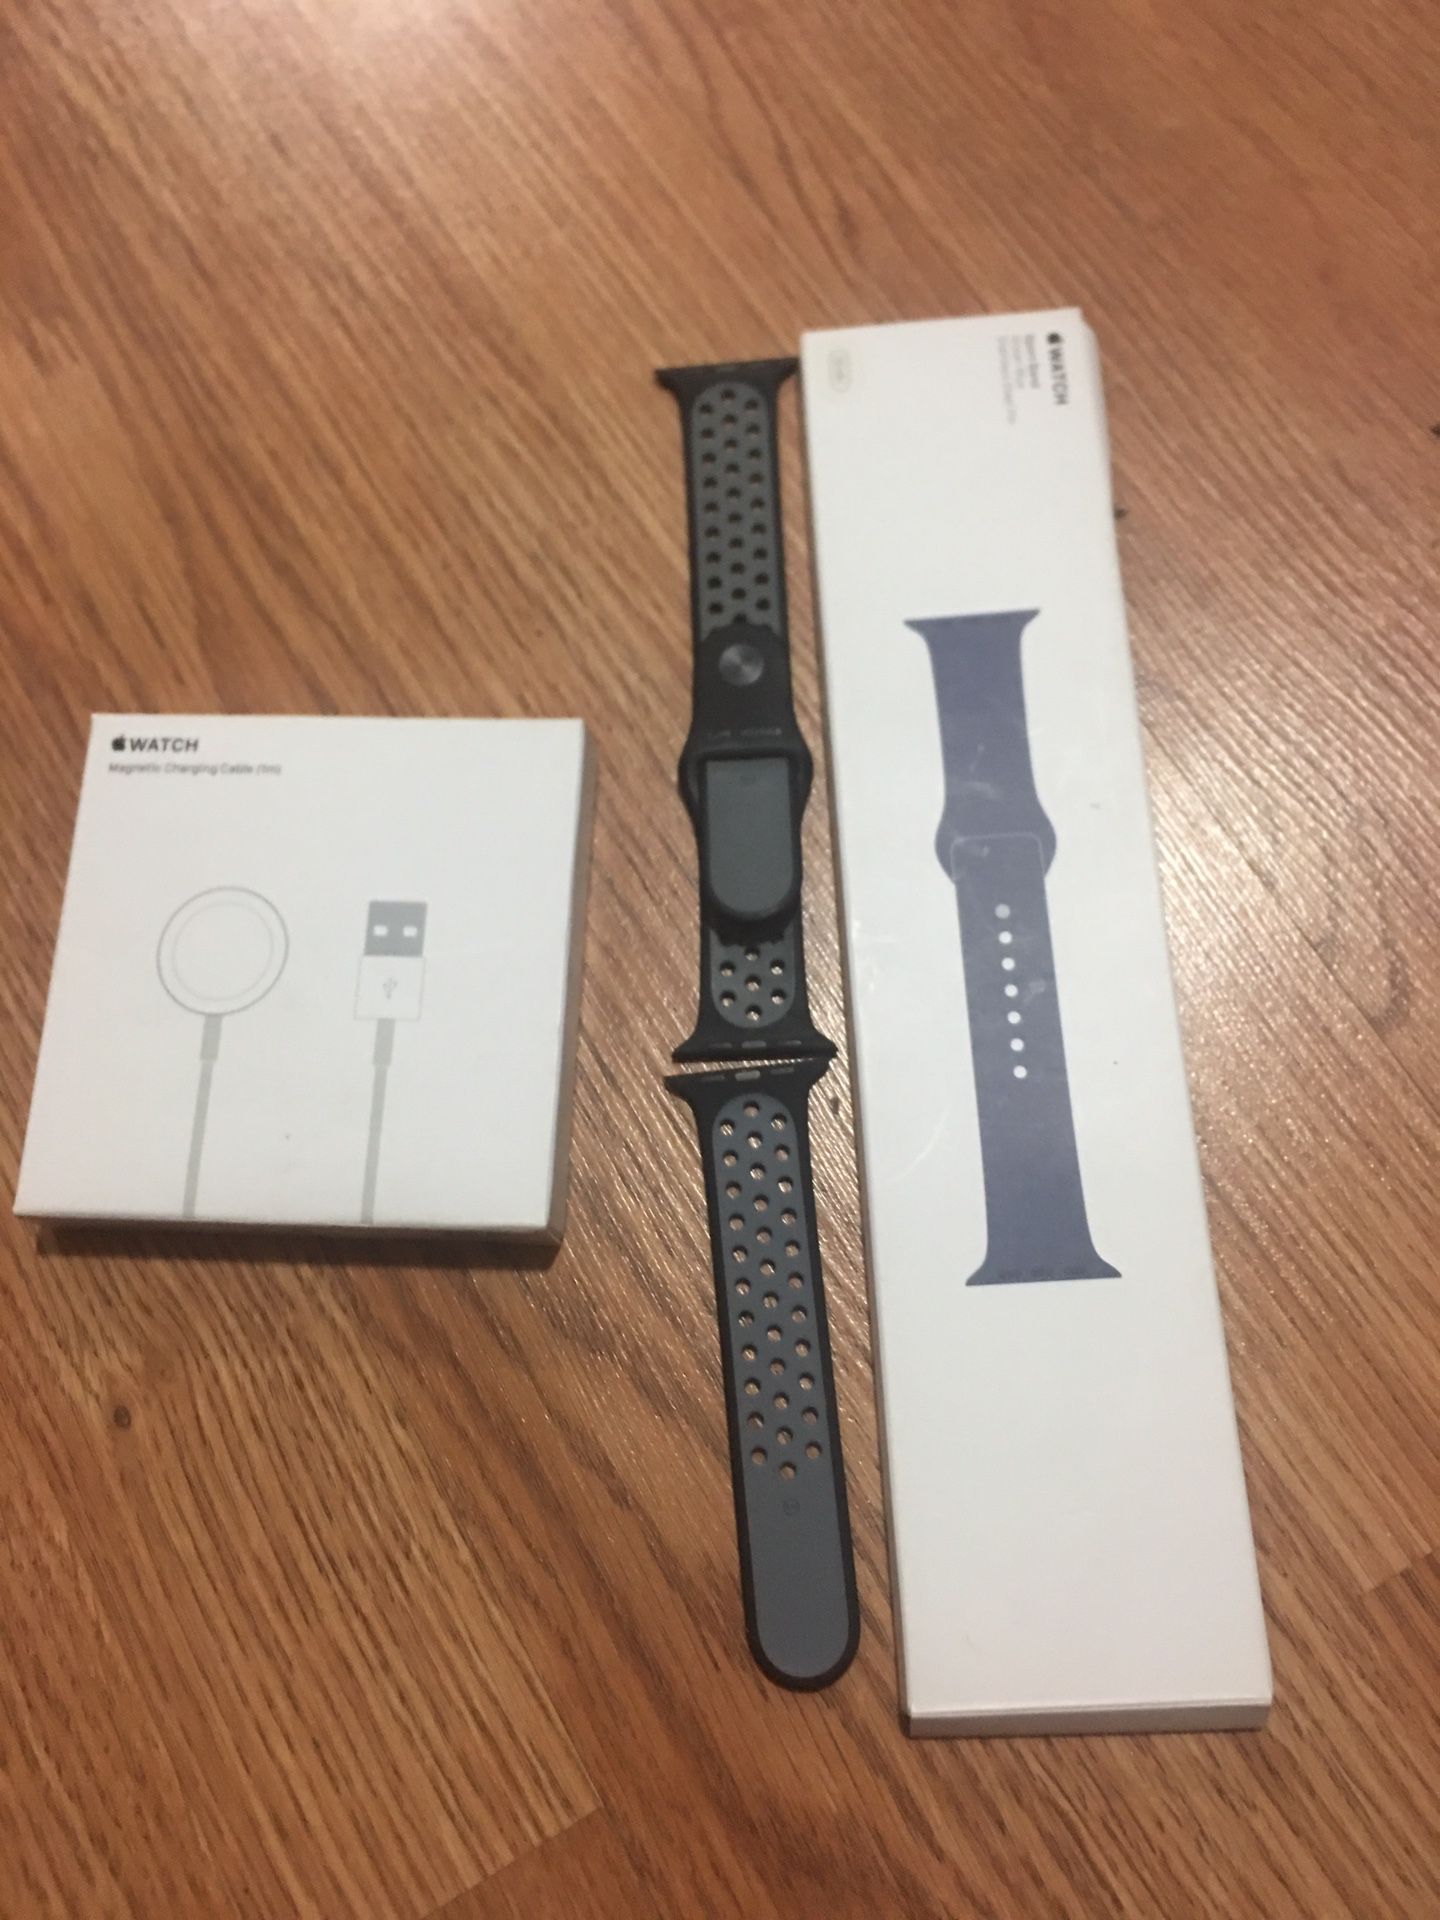 Brand new Apple Watch charger & bands